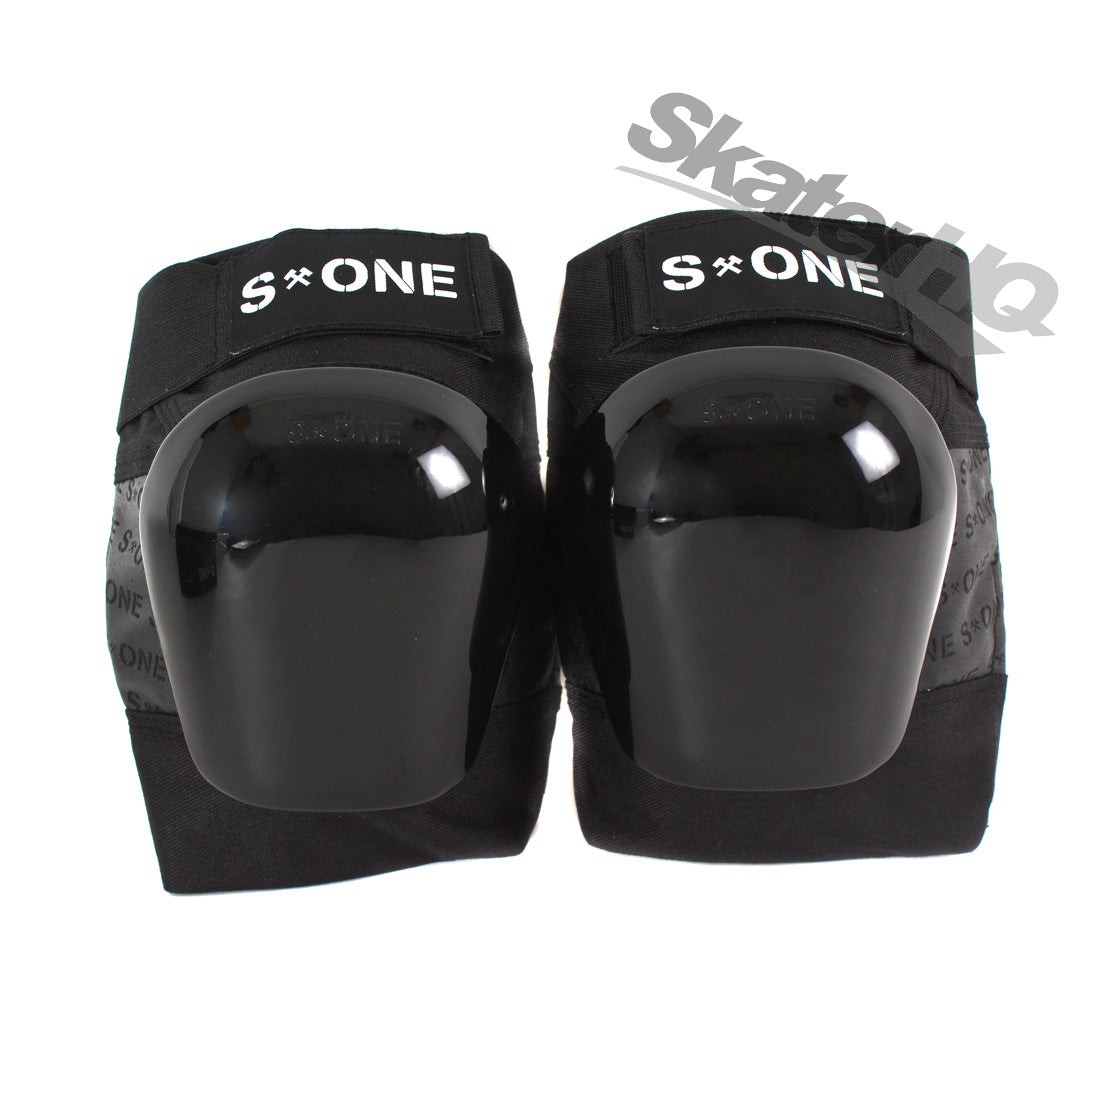 S-One Pro Knee Pads Black - XLarge Protective Gear